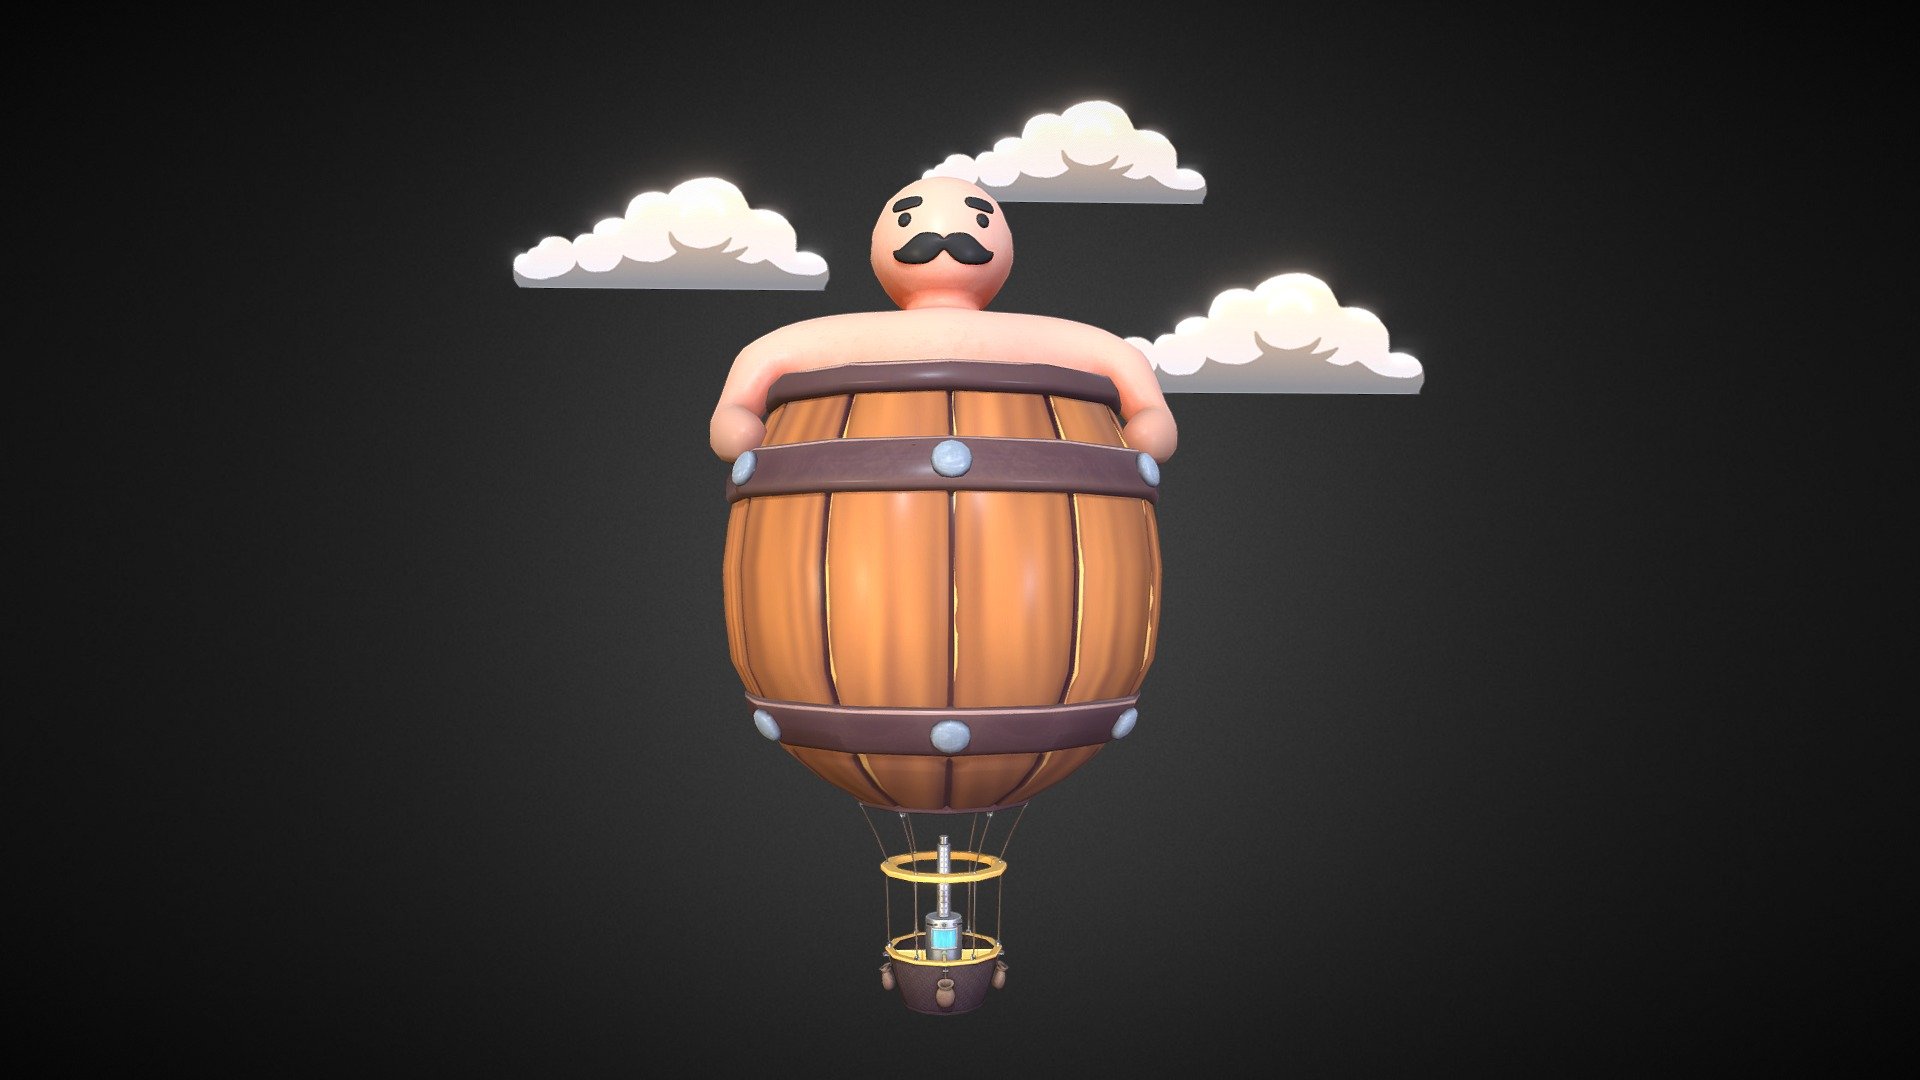 Hot air Ballon model for the World Skills contest.
The idea came to me while I was eating a pack of pringles and desperately thinking of what can I model.

Programs: 3DS MAX, Substance Painter.

Tris: 9.954 - World Skills Barrel Tub Air Balloon 3d model